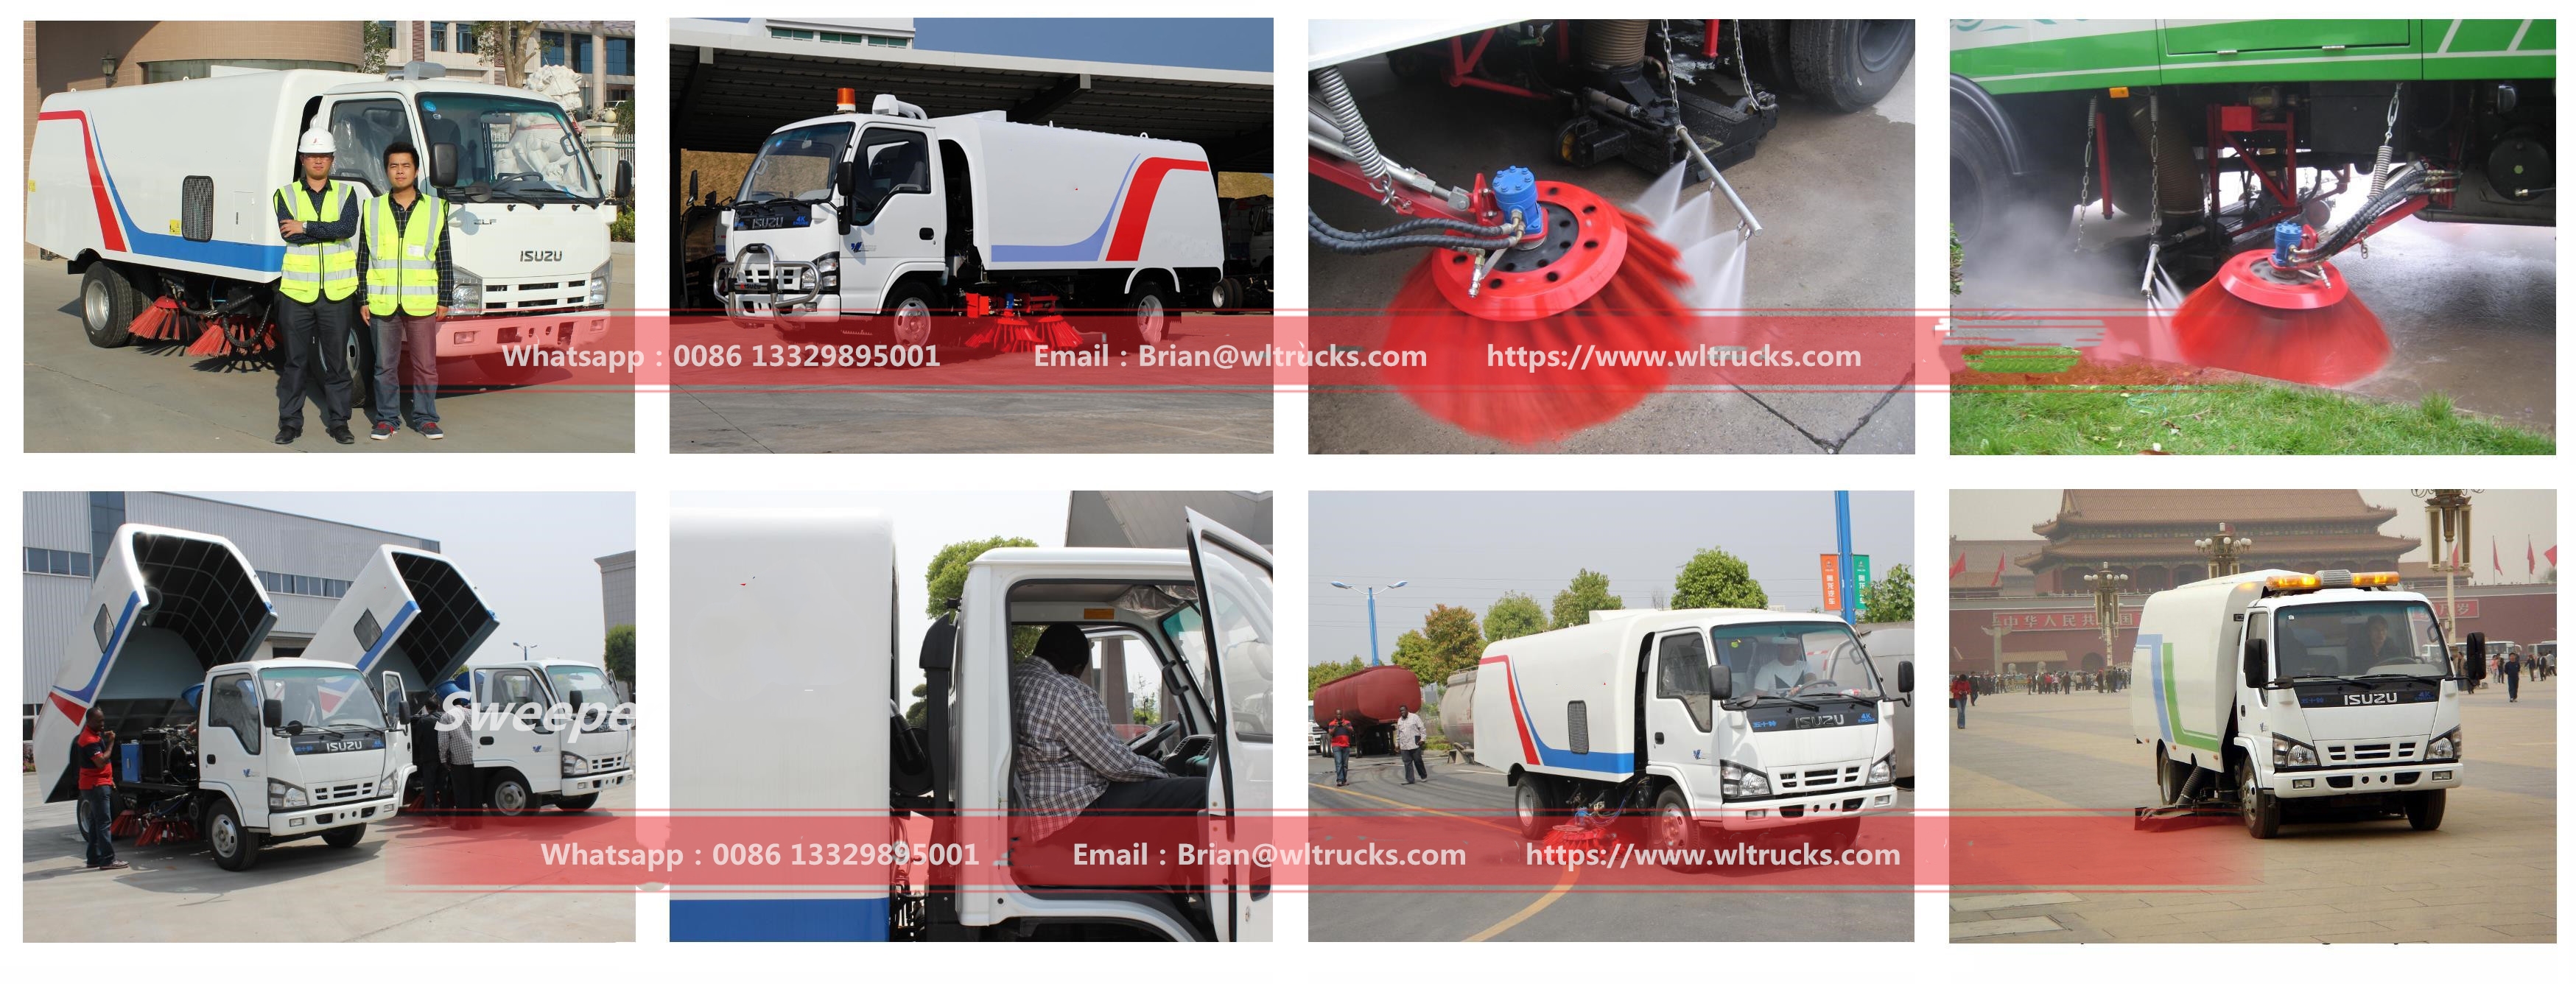 Street sweeping truck technical training support